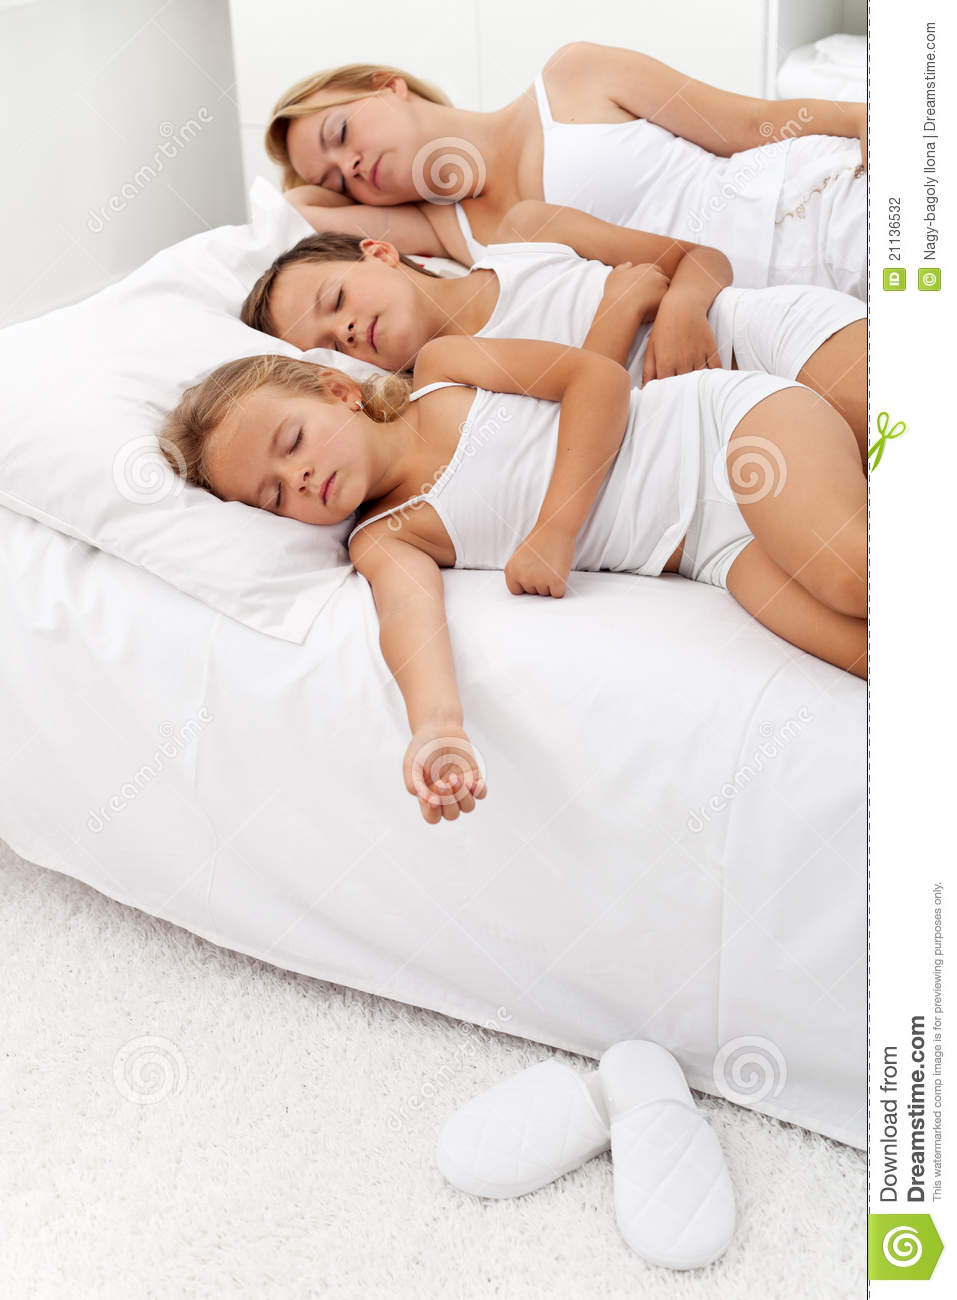 Healthy People Taking A Nap Stock Photography   Image  21136532